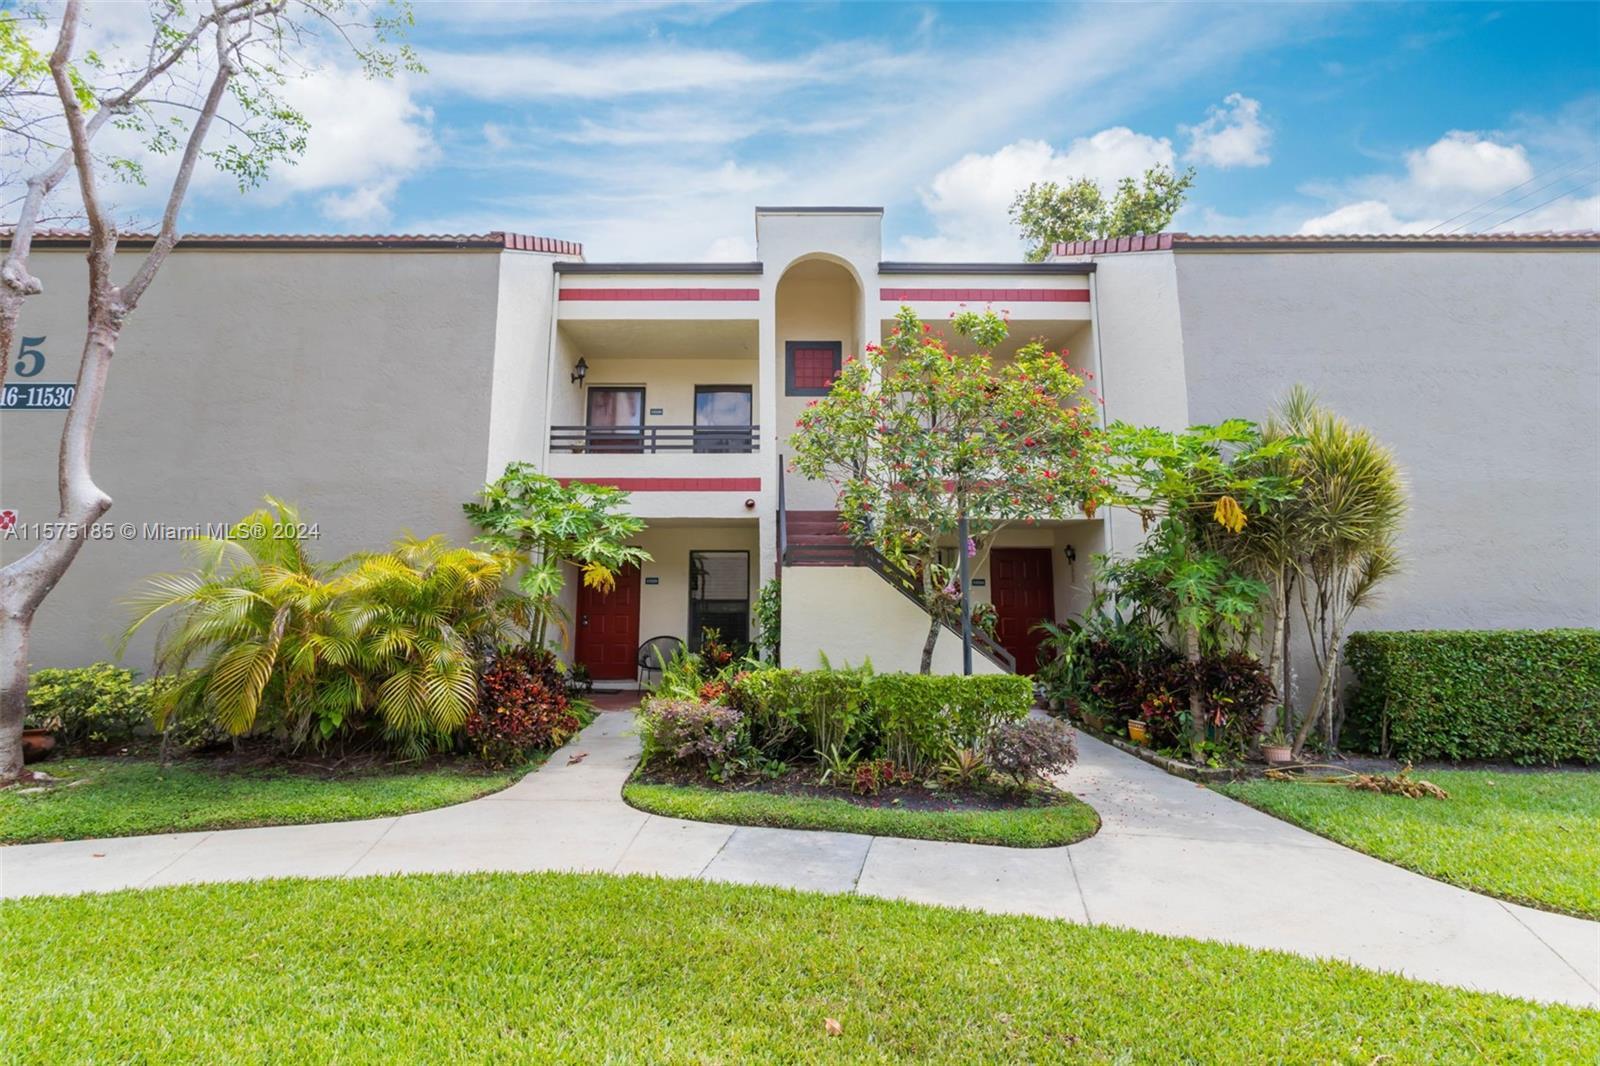 Photo of 11530 NW 10th St #11530 in Pembroke Pines, FL